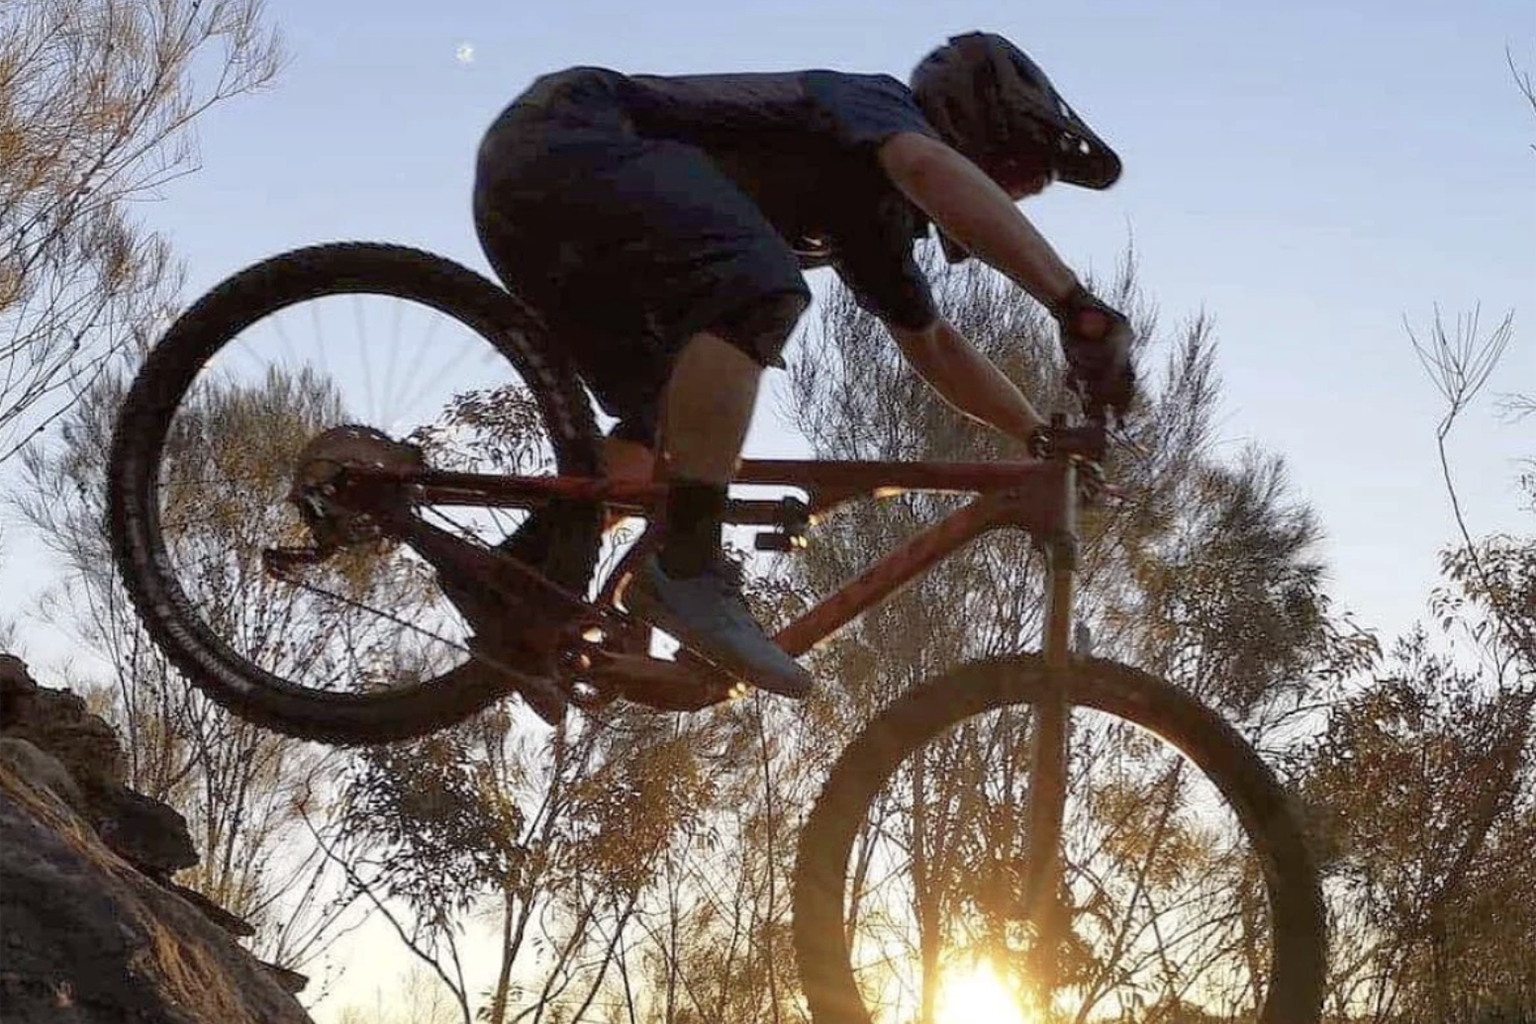 'CANNONBALL' RIPPING HIS LOCAL TRAILS